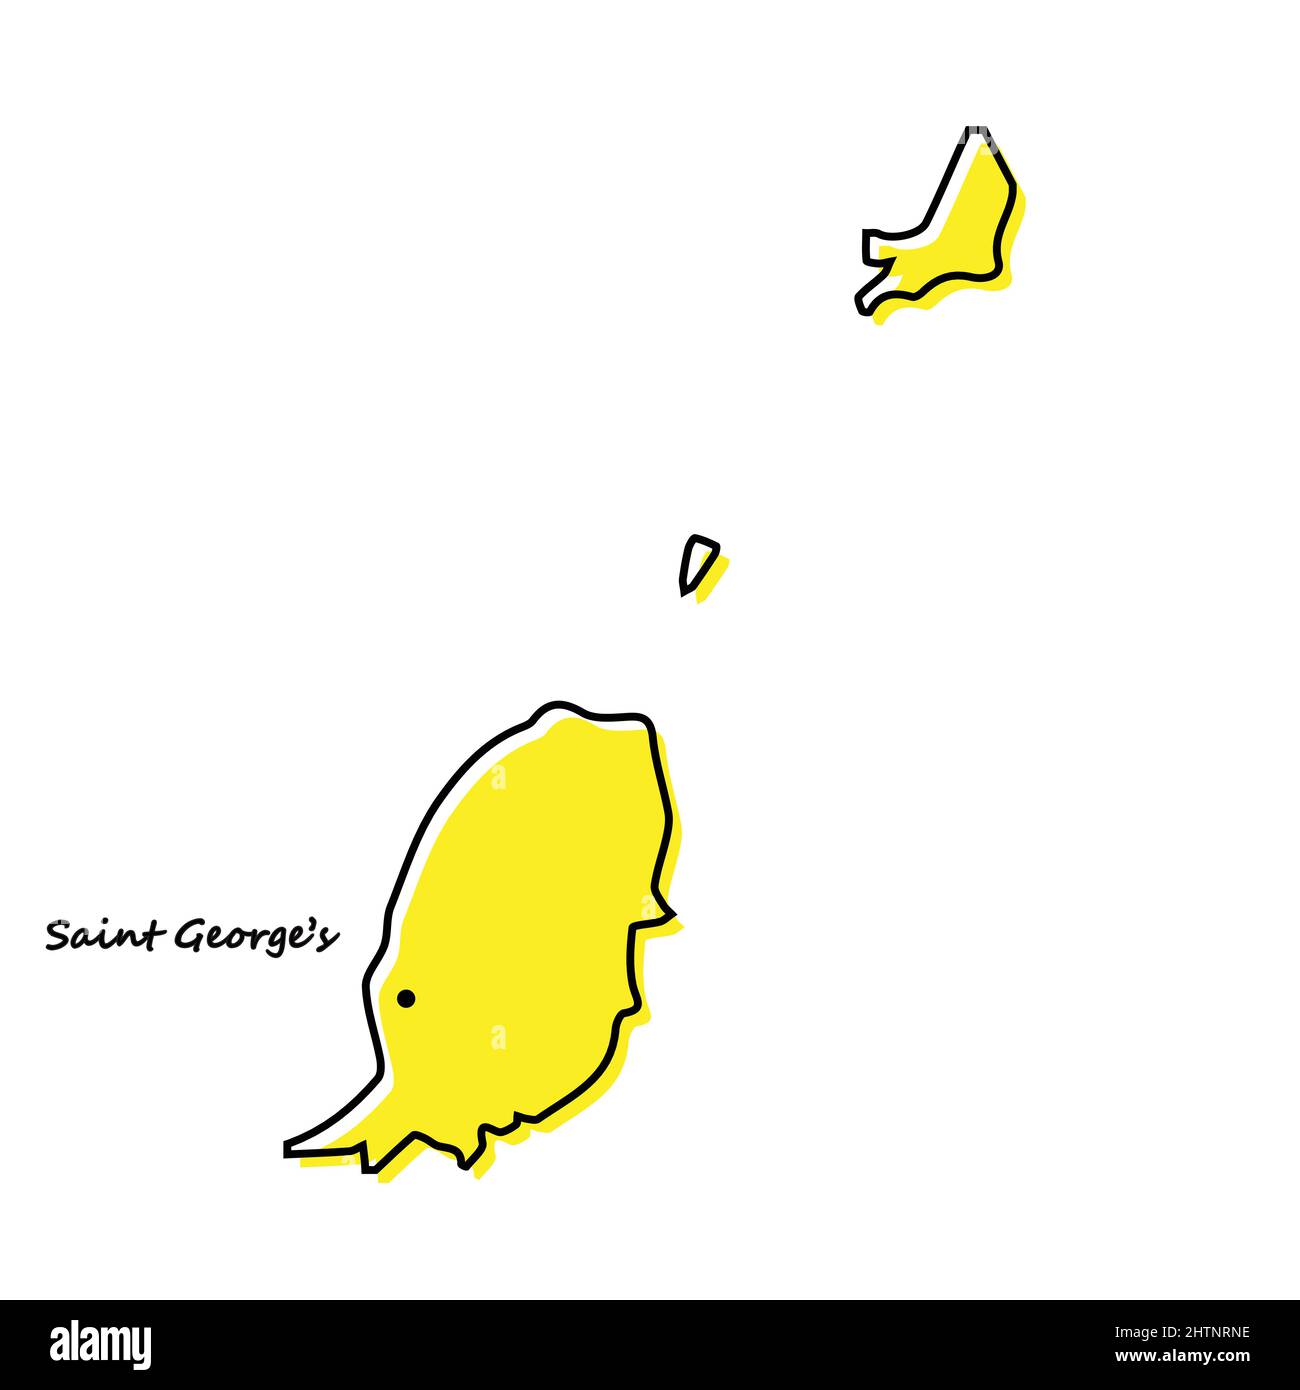 Simple outline map of Grenada with capital location. Stylized minimal line design Stock Vector